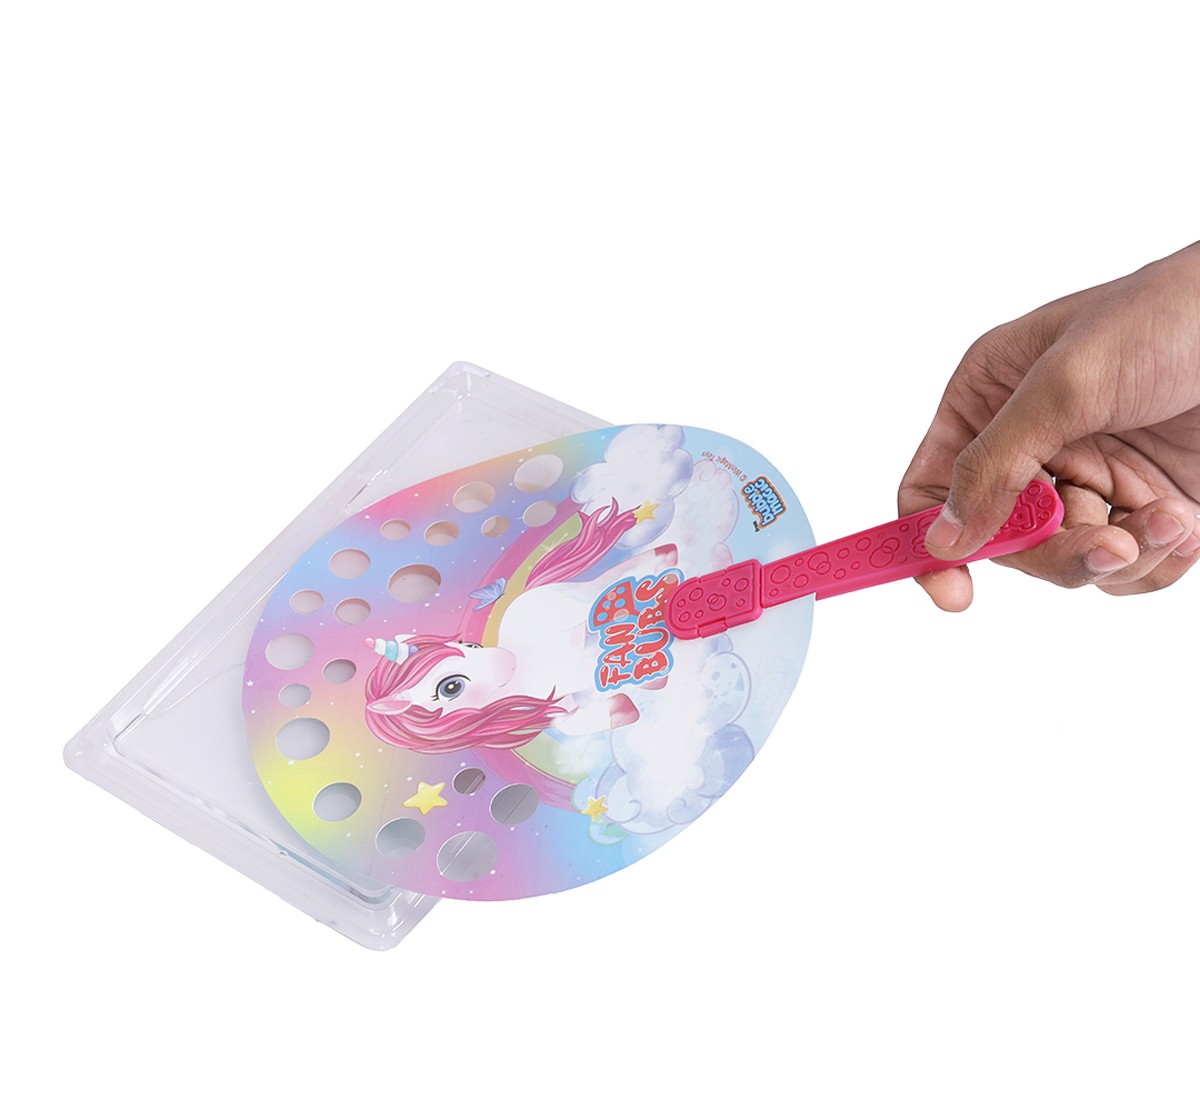 Bubble Magic Fan Bubs Unicorn, for The Kids 3 Years and Above